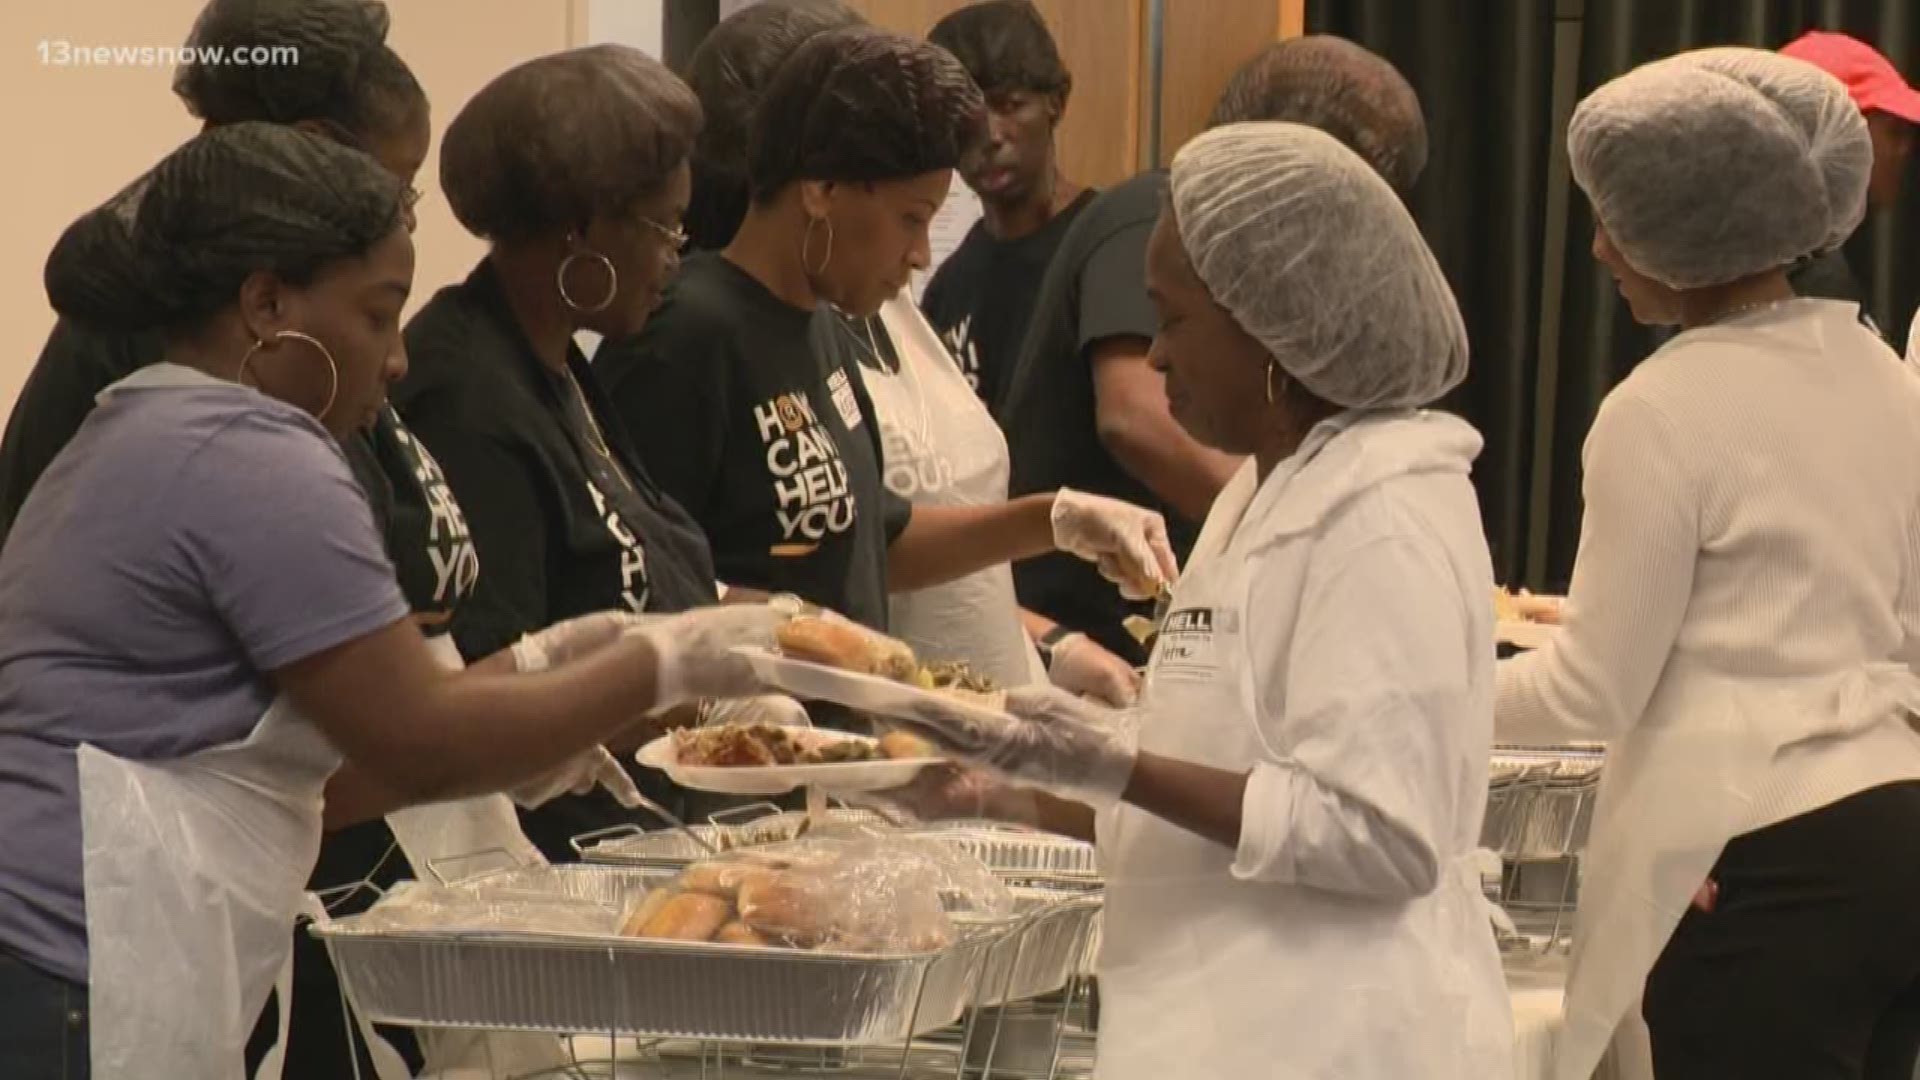 Calvary Revival Church in Norfolk hosted a feed the city event. The church and volunteers made sure more than 700 people had a hot meal for the holiday.